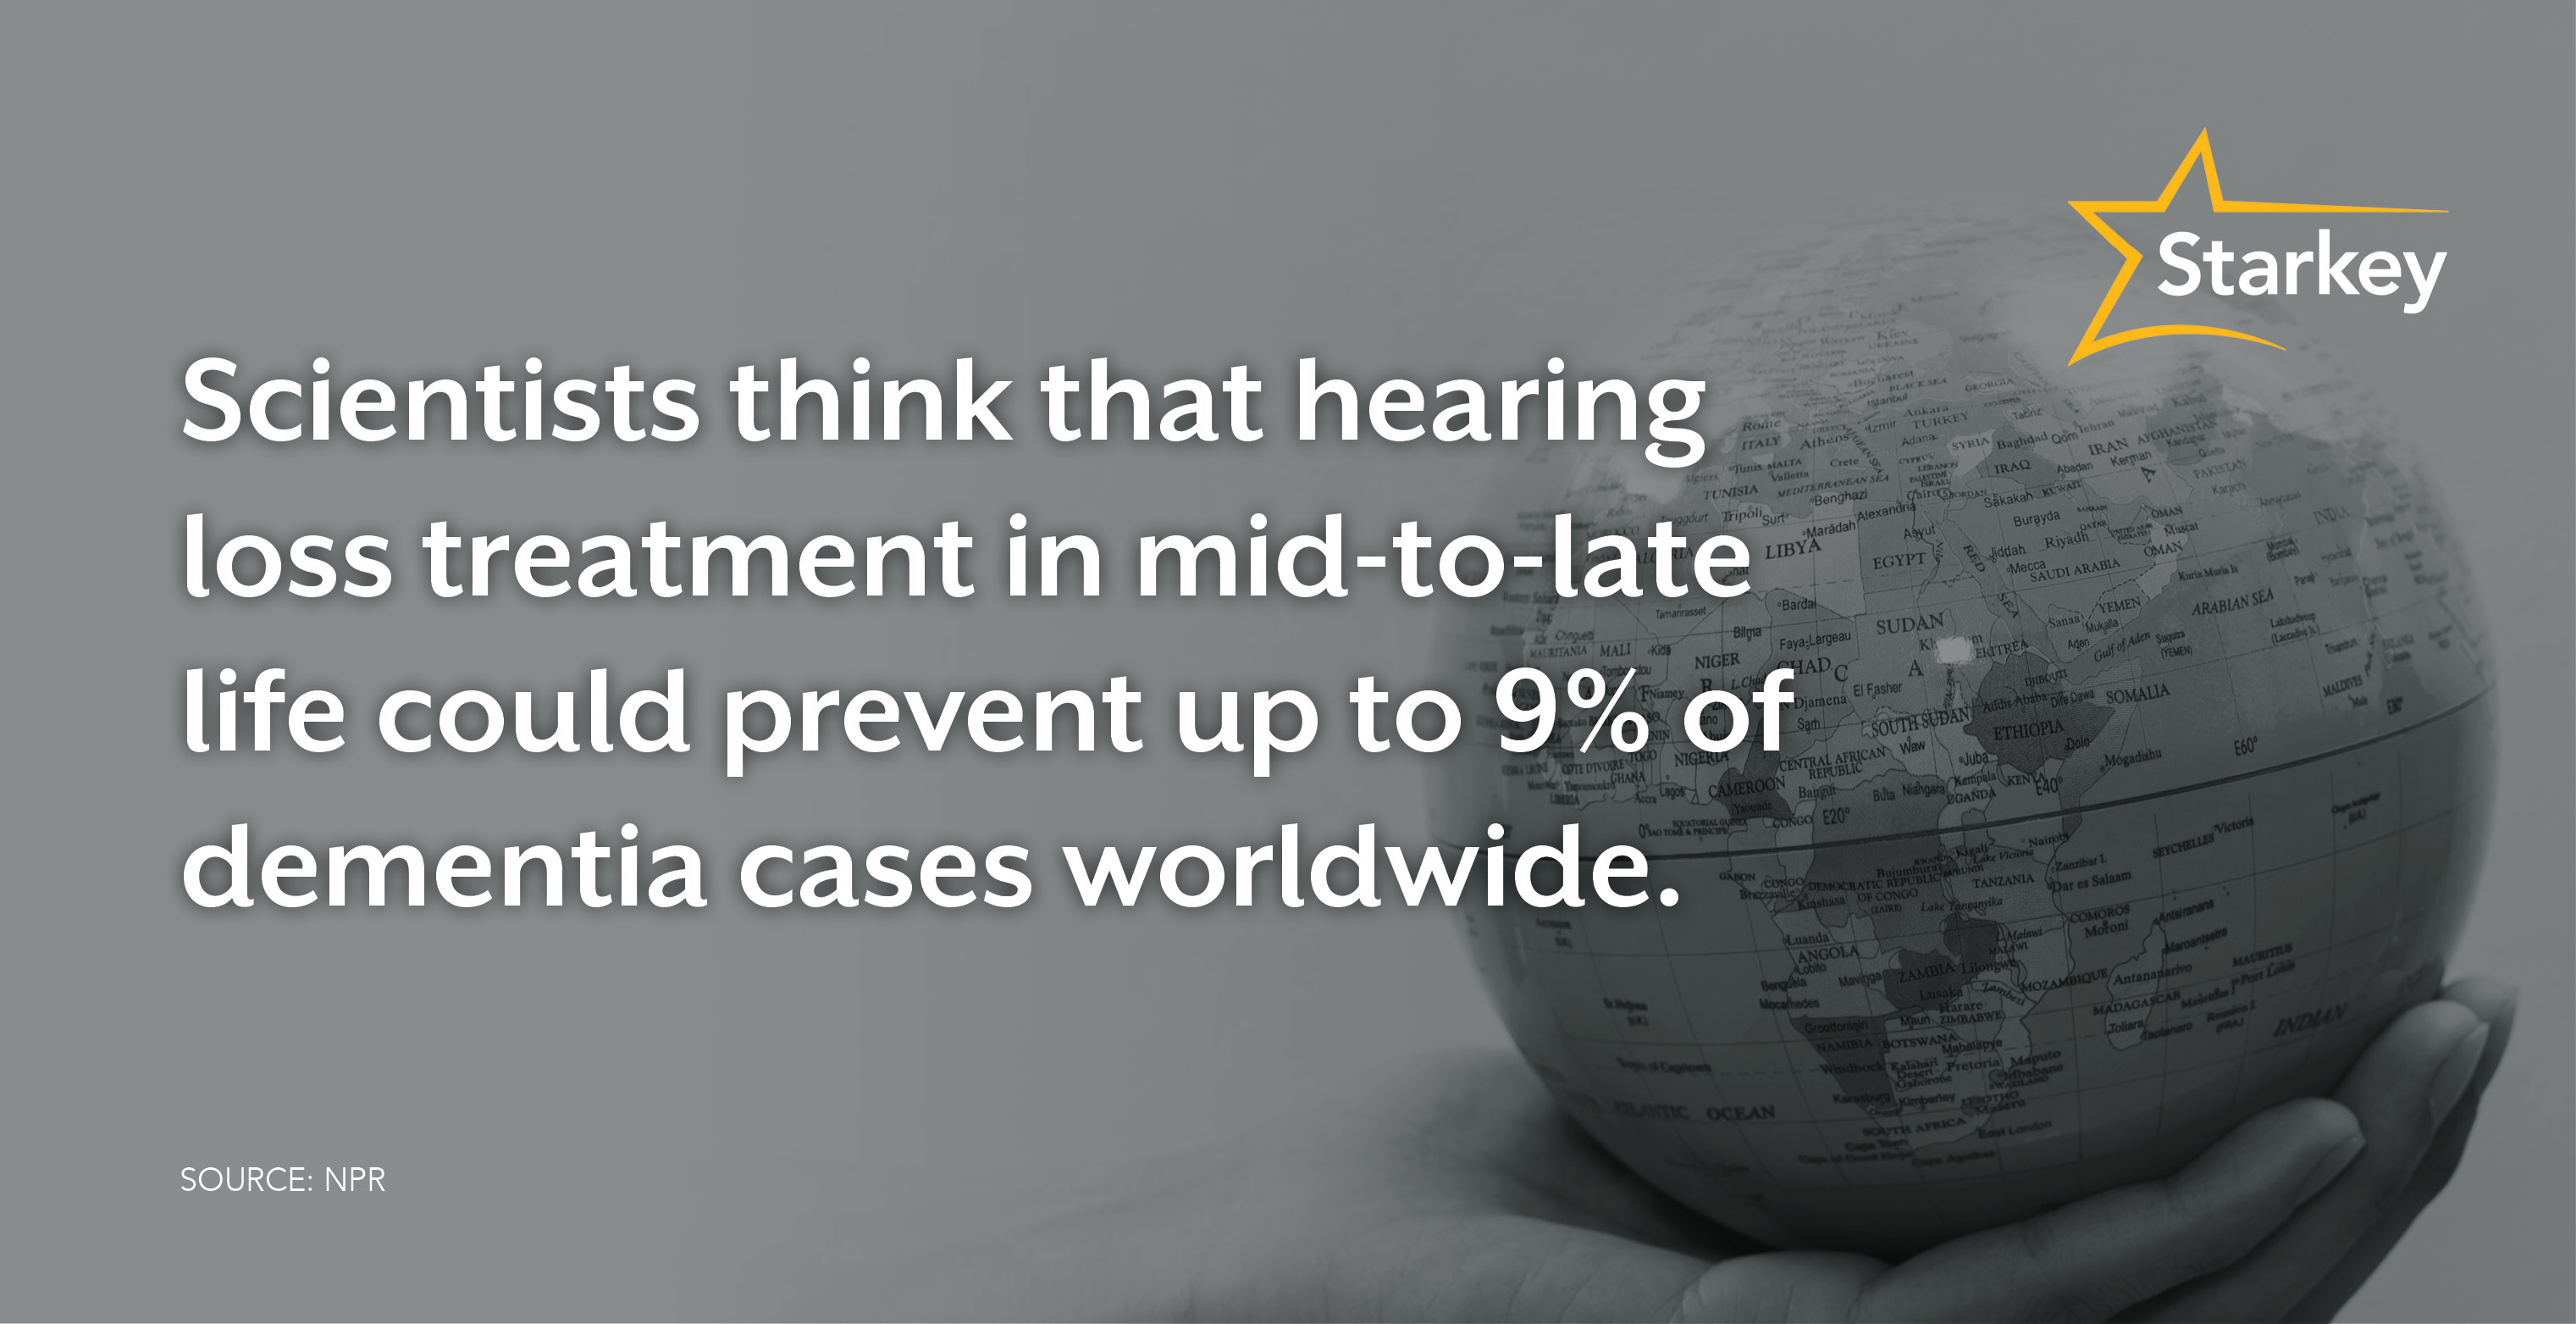 Image of globe with the factoid from NPR that reads "scientists think that hearing loss treatment in mid-to-late life could prevent up to 9 percent of demential cases worldwide."